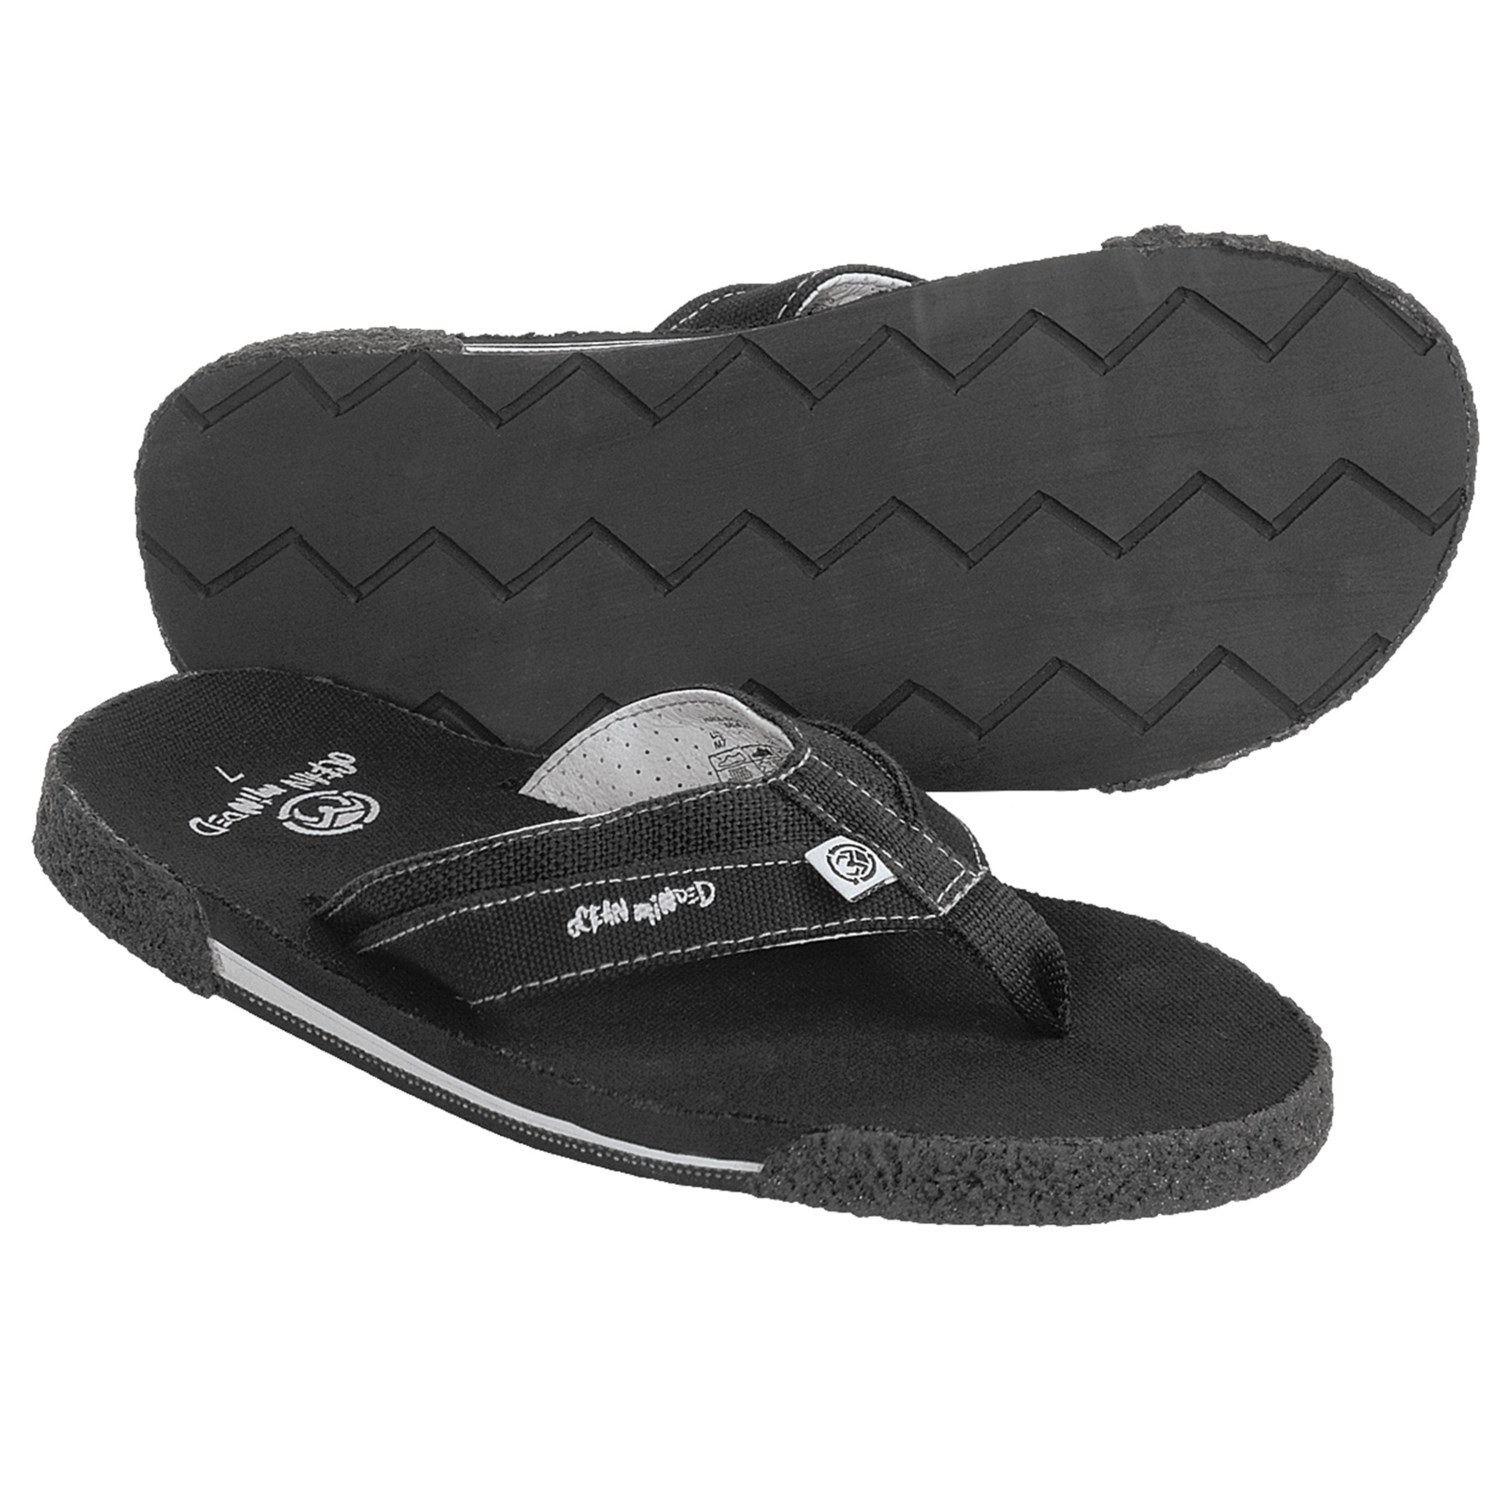 ... - Leather-Hemp-Recycled Materials, Flip-Flops(For Men) - Save 48%